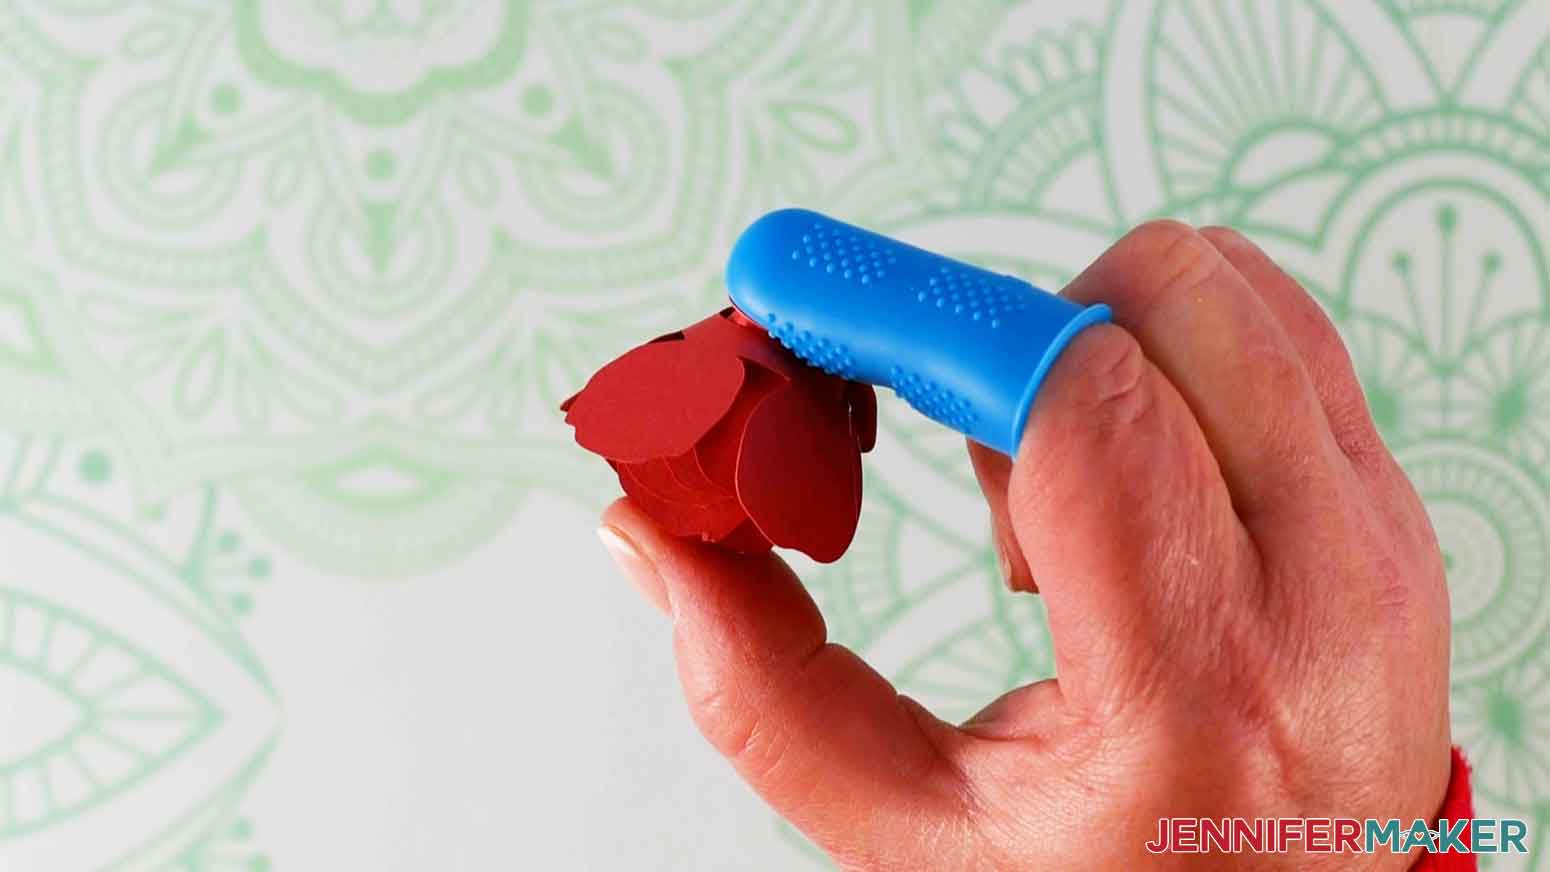 Press the tab on the hot glue to make the rose for my paper flower shadow box